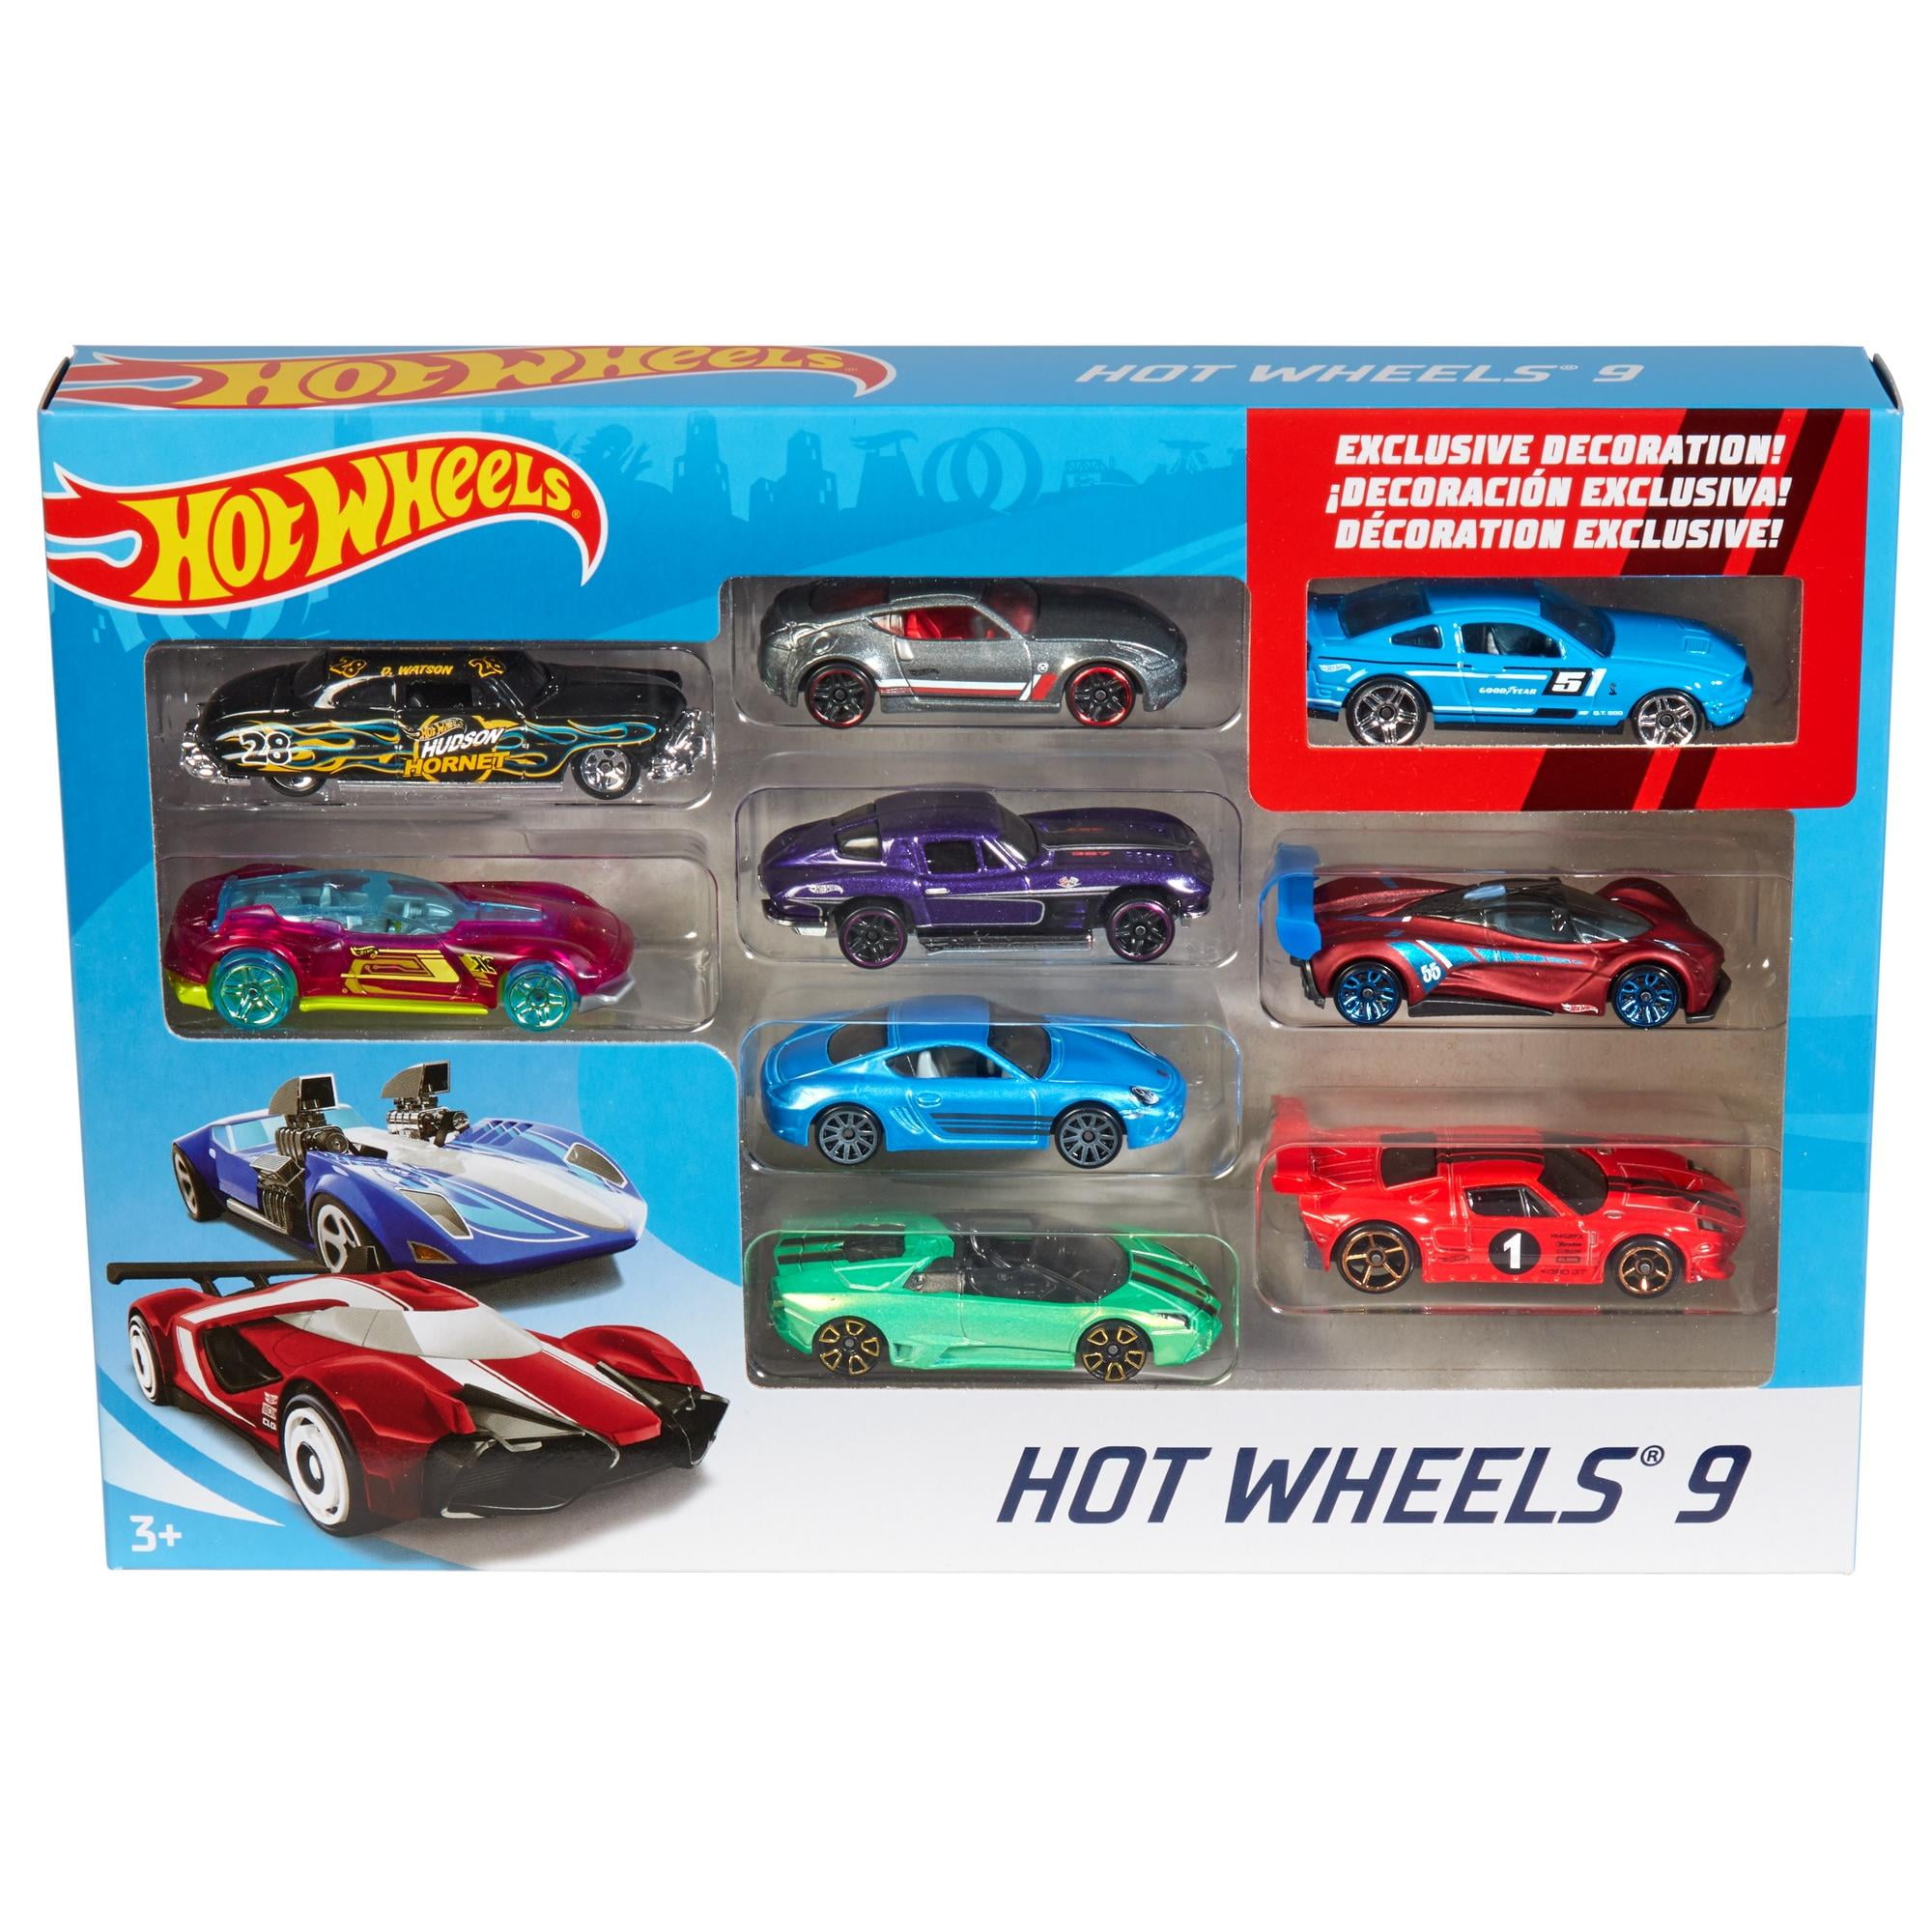 Hotwheels 5 Pack Mini Cooper USA only never sold in single blisters NICE